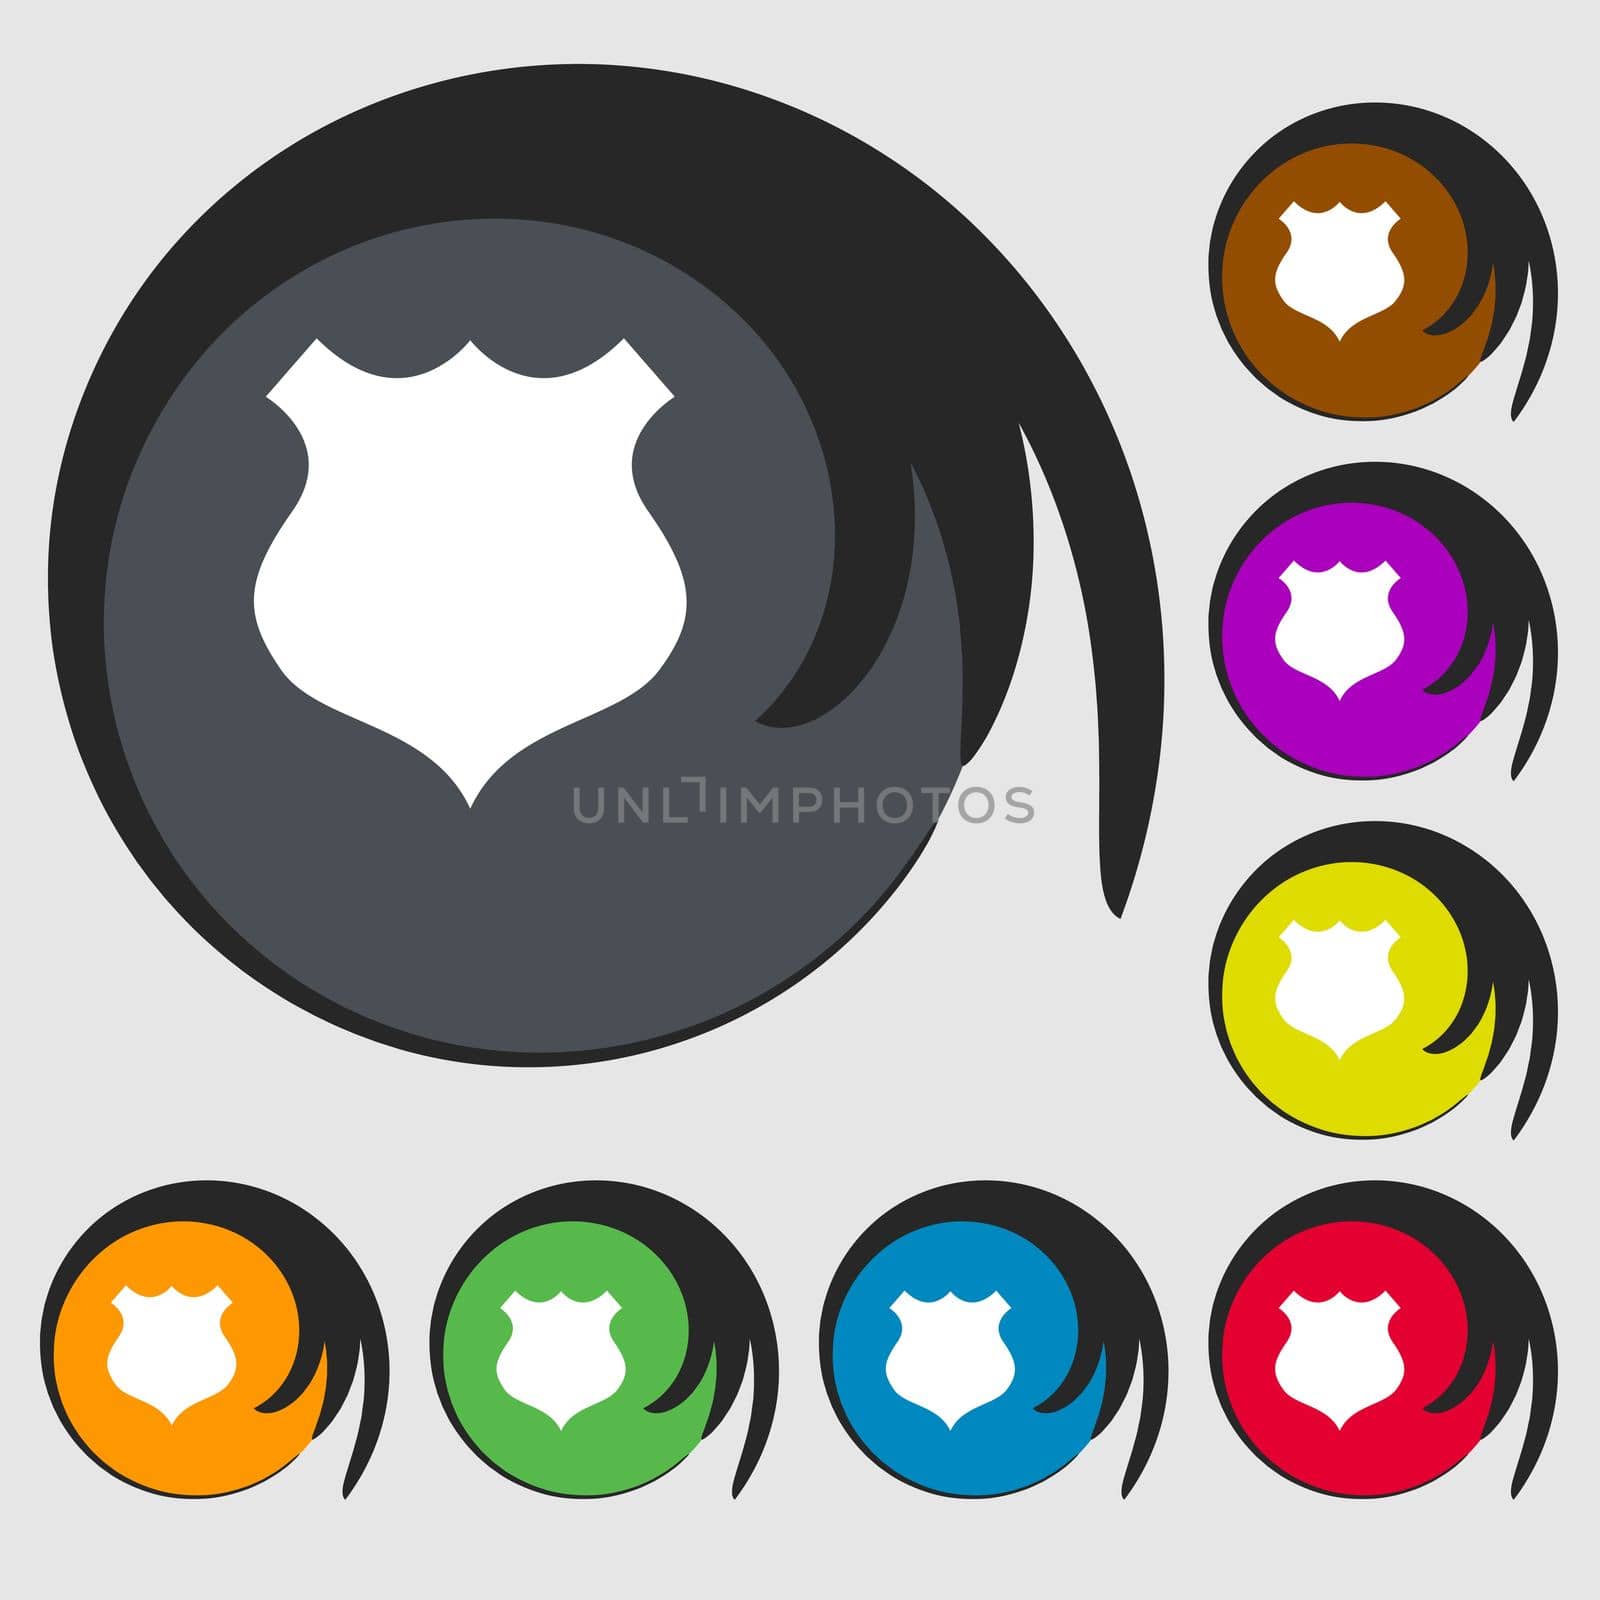 shield icon sign. Symbols on eight colored buttons. illustration